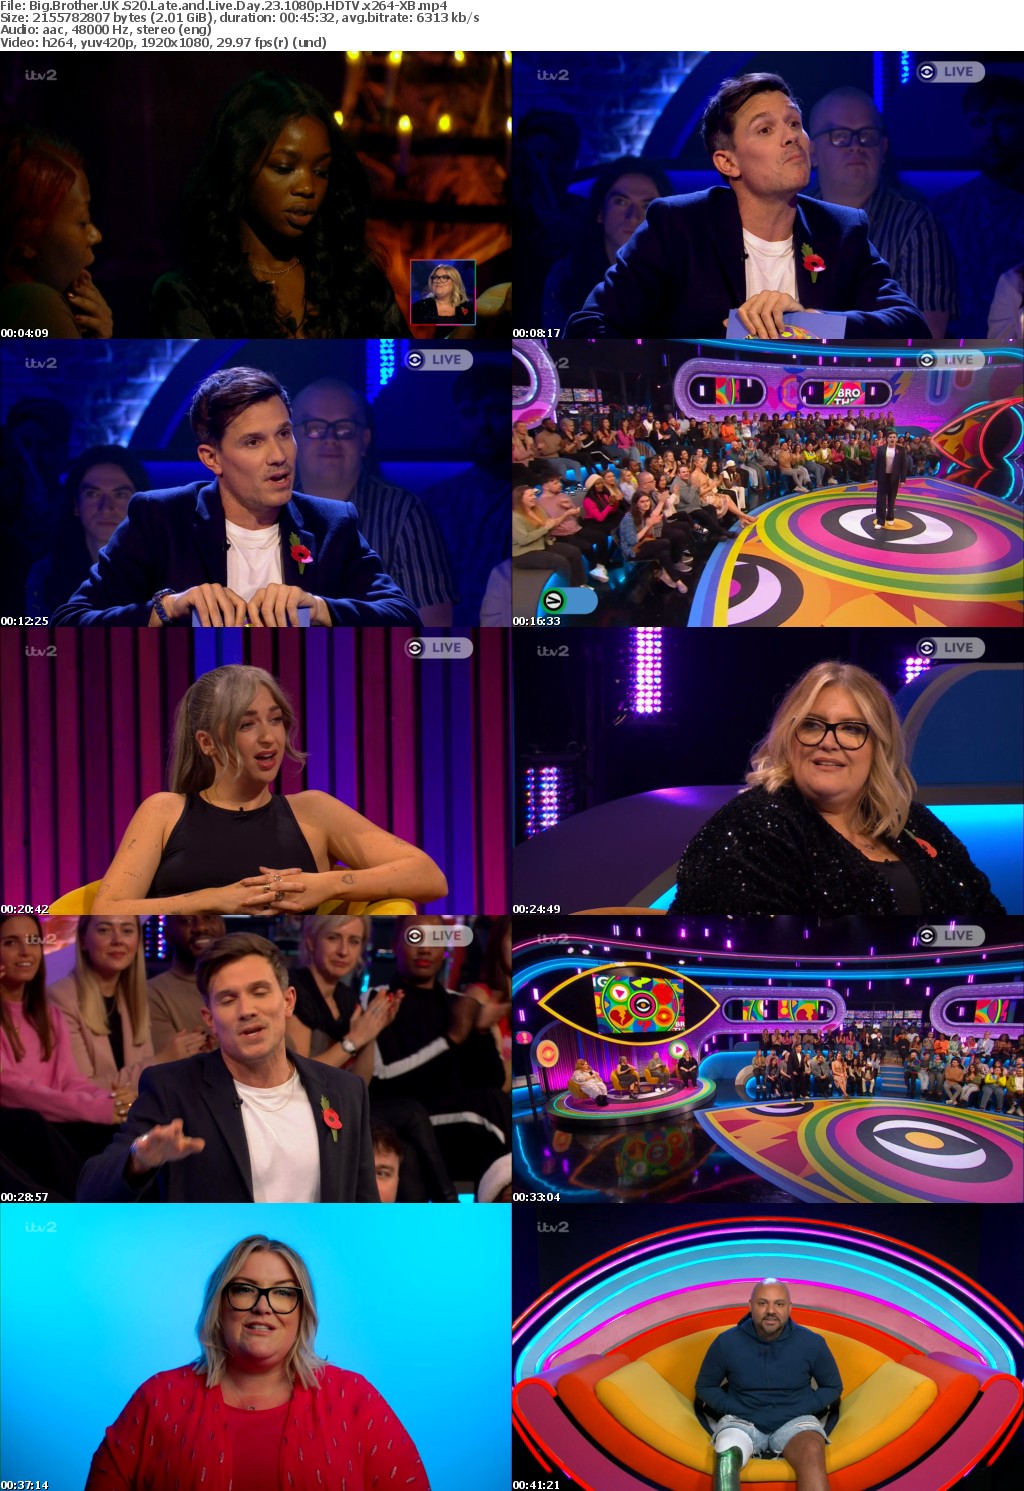 Big Brother UK S20 Late and Live Day 23 1080p HDTV x264-XB